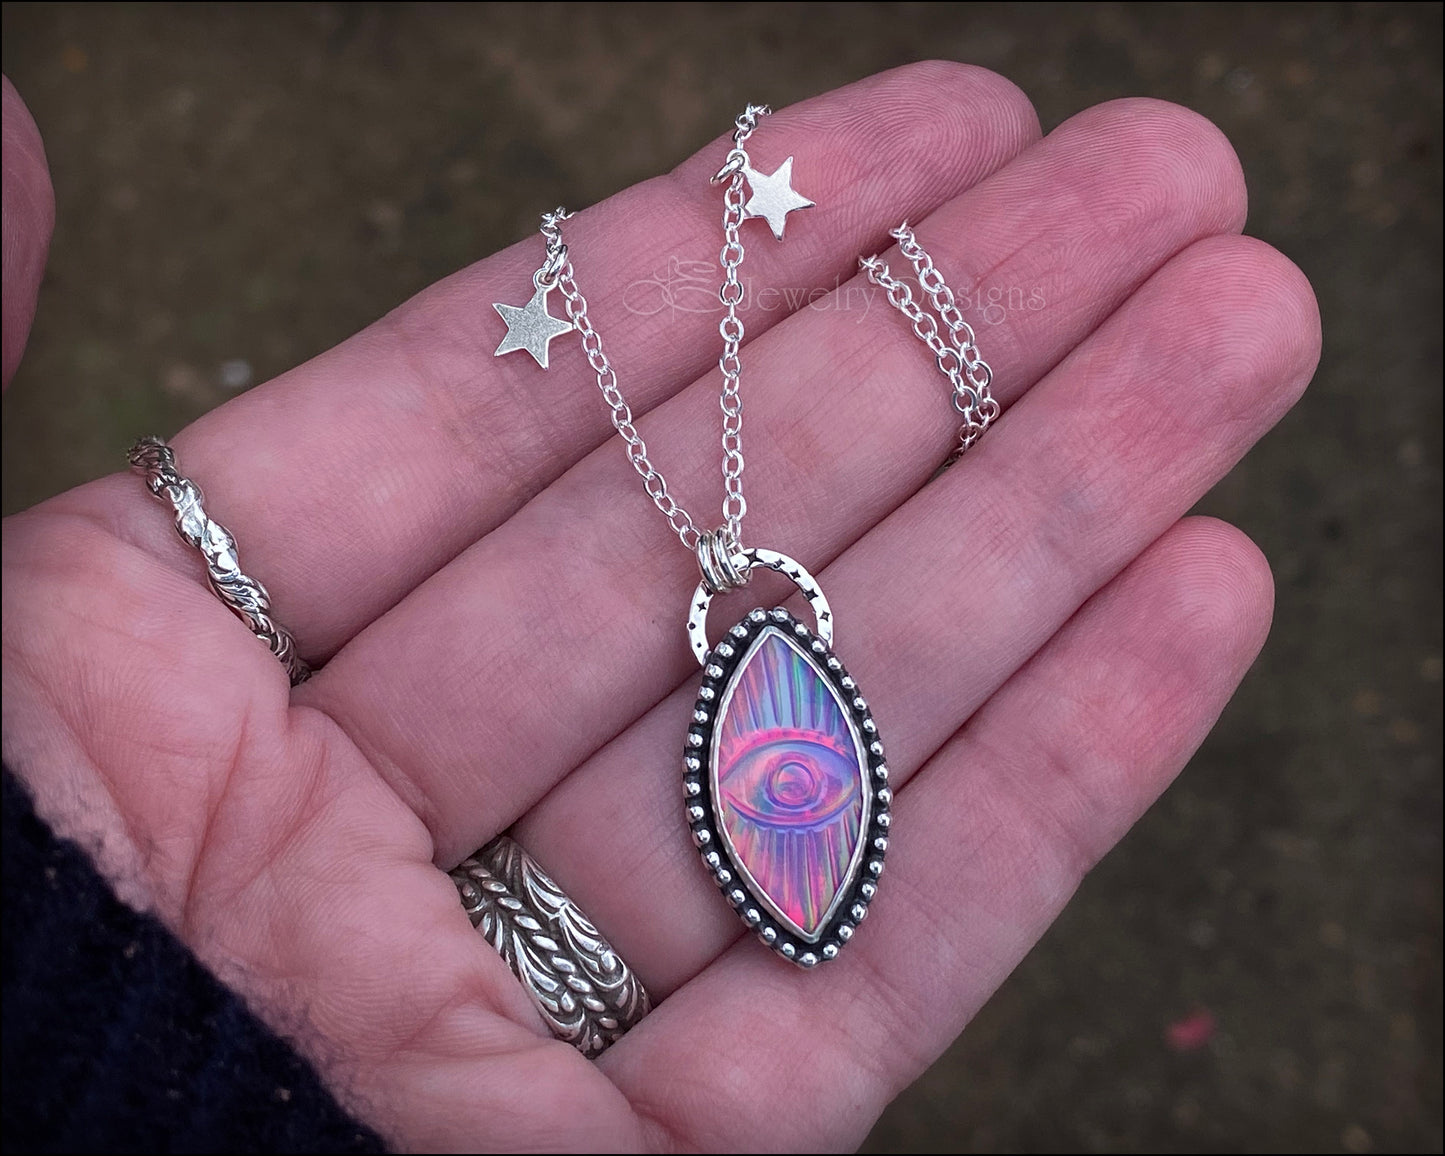 Load image into Gallery viewer, Aurora Opal Evil Eye Celestial Necklace - LE Jewelry Designs
